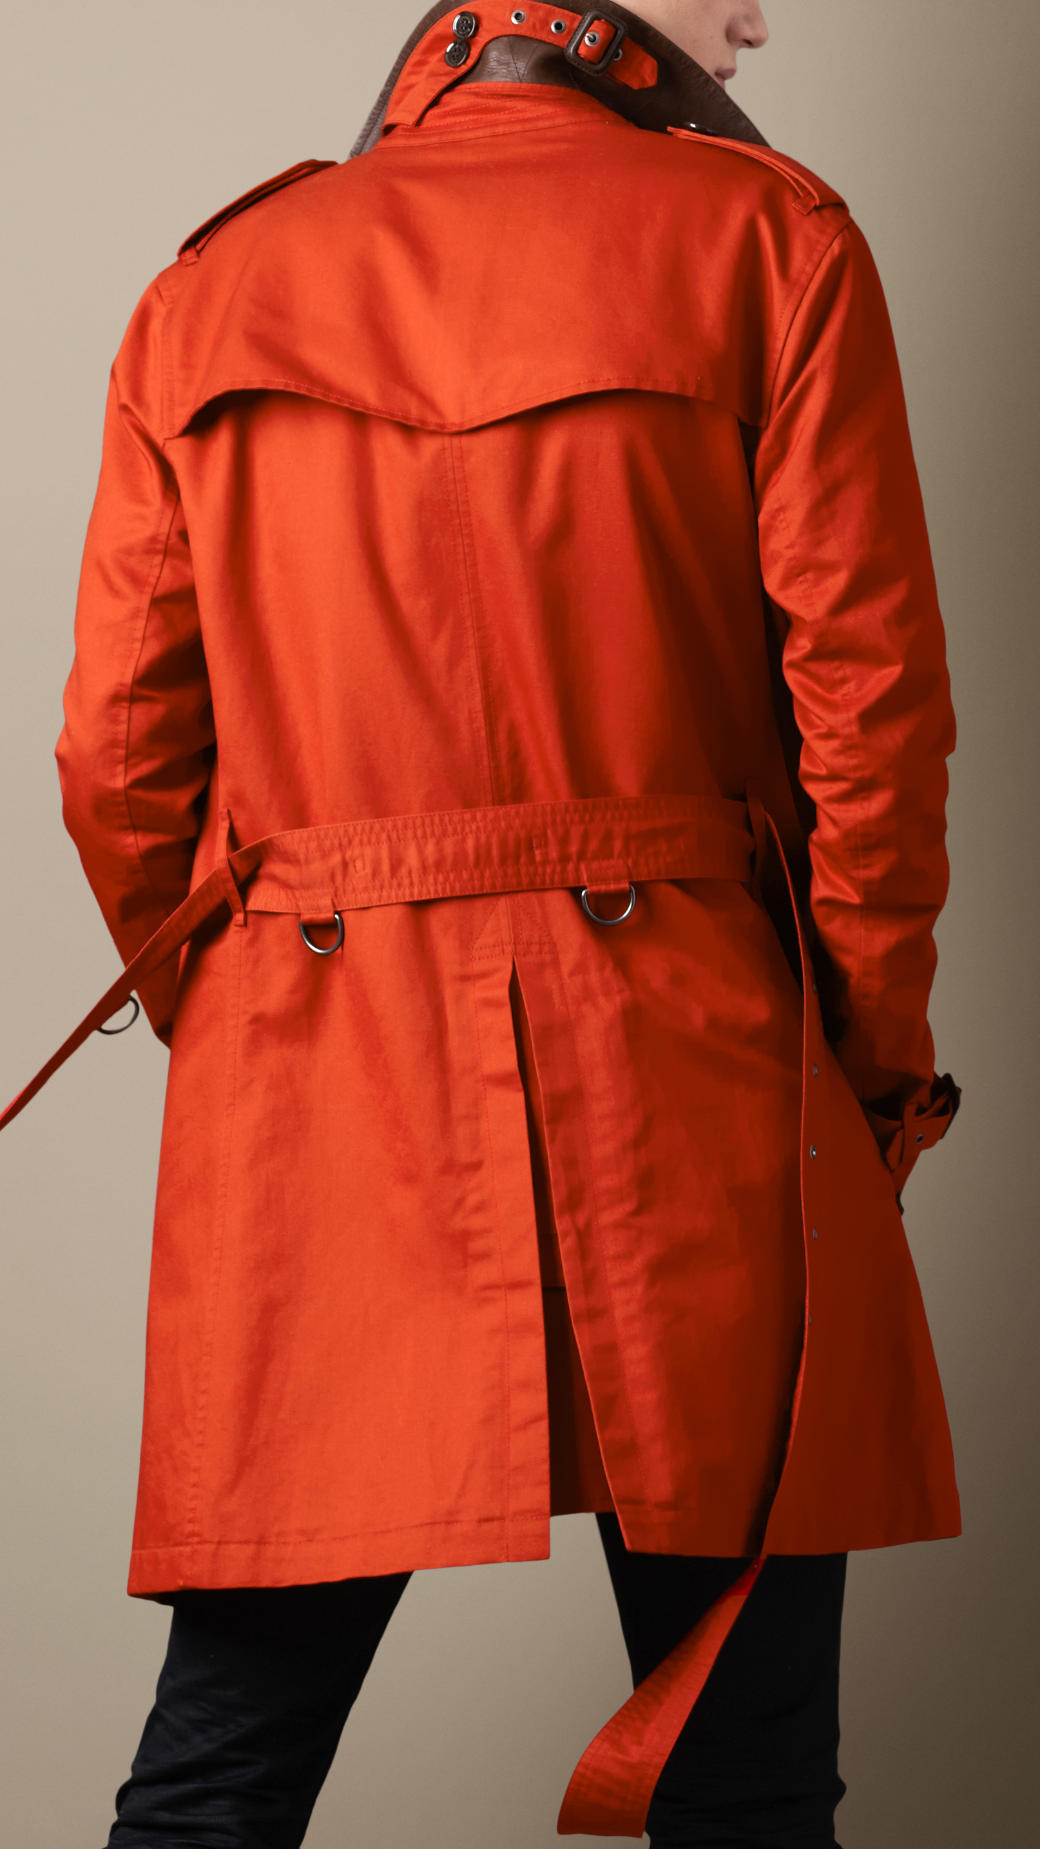 Lyst - Burberry Brit Midlength Leather Trim Trench Coat in Orange for Men